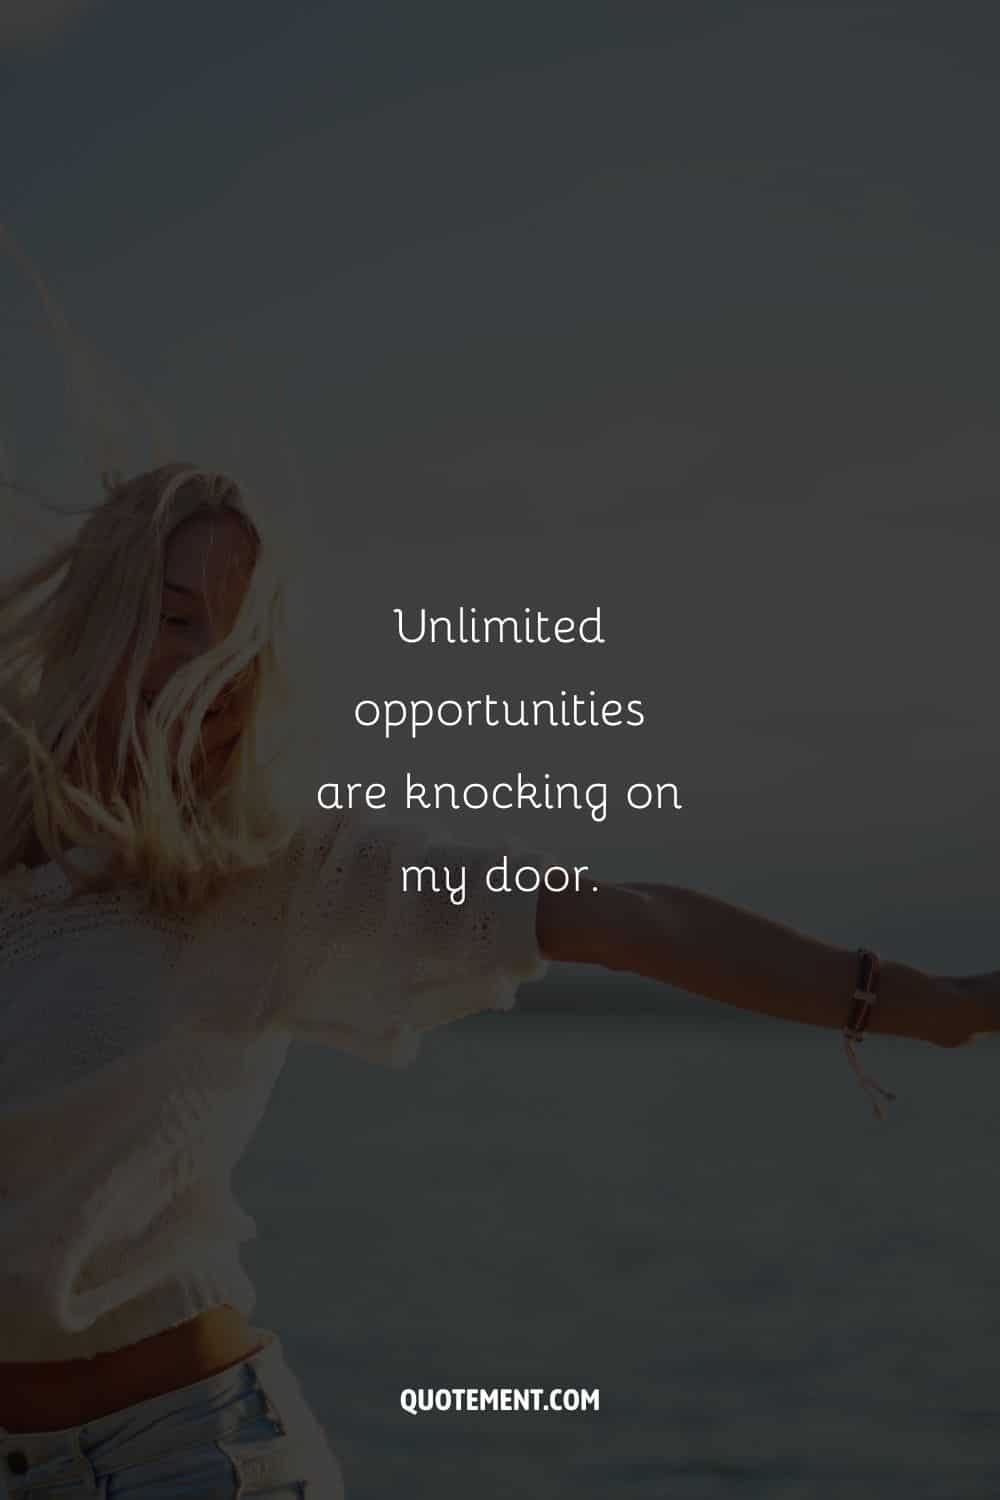 Image of a happy woman representing unlimited opportunities affirmation